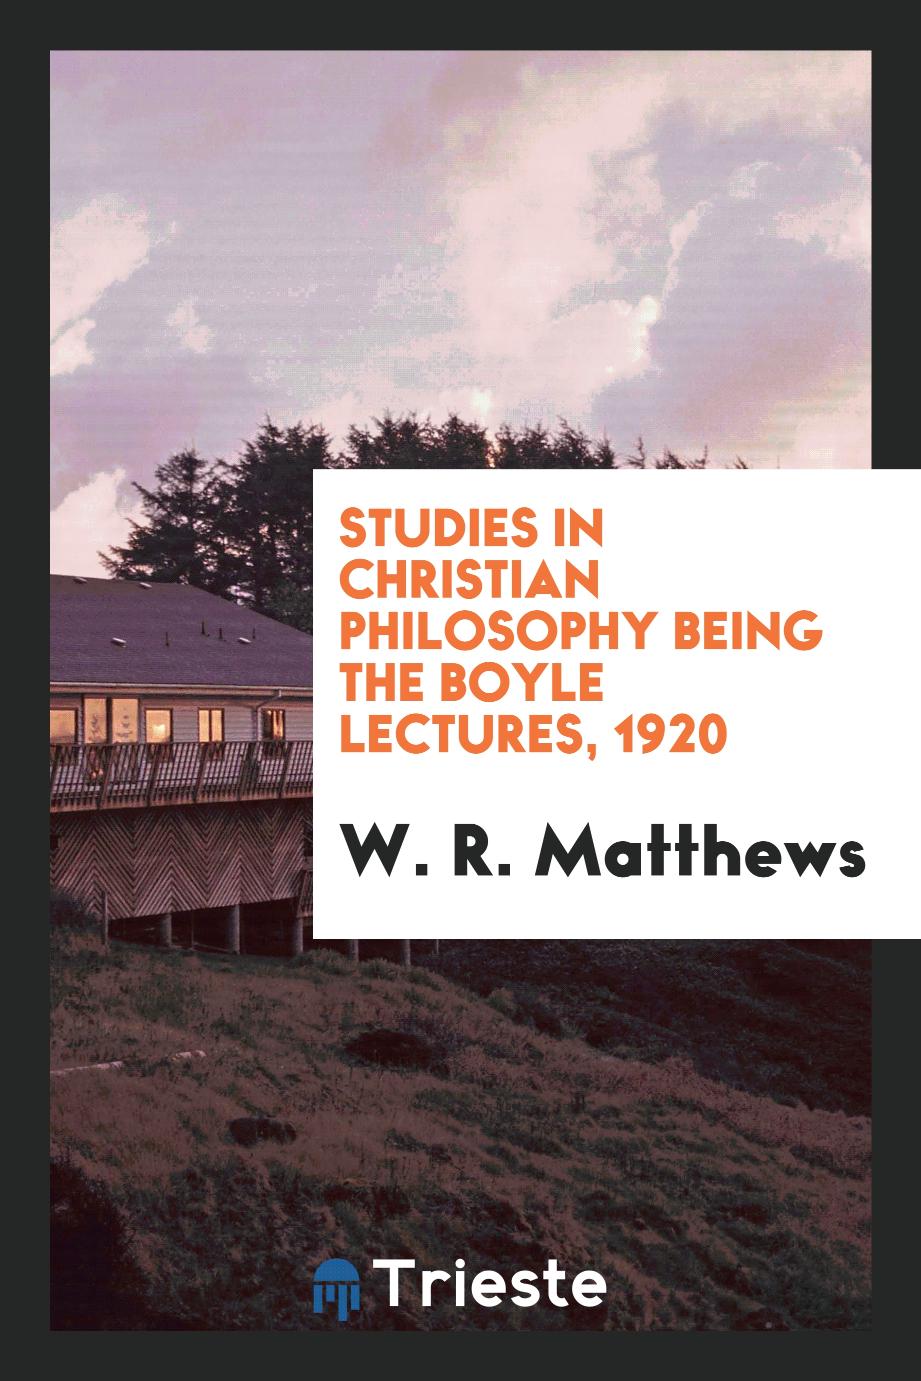 W. R. Matthews - Studies in Christian Philosophy Being the Boyle Lectures, 1920